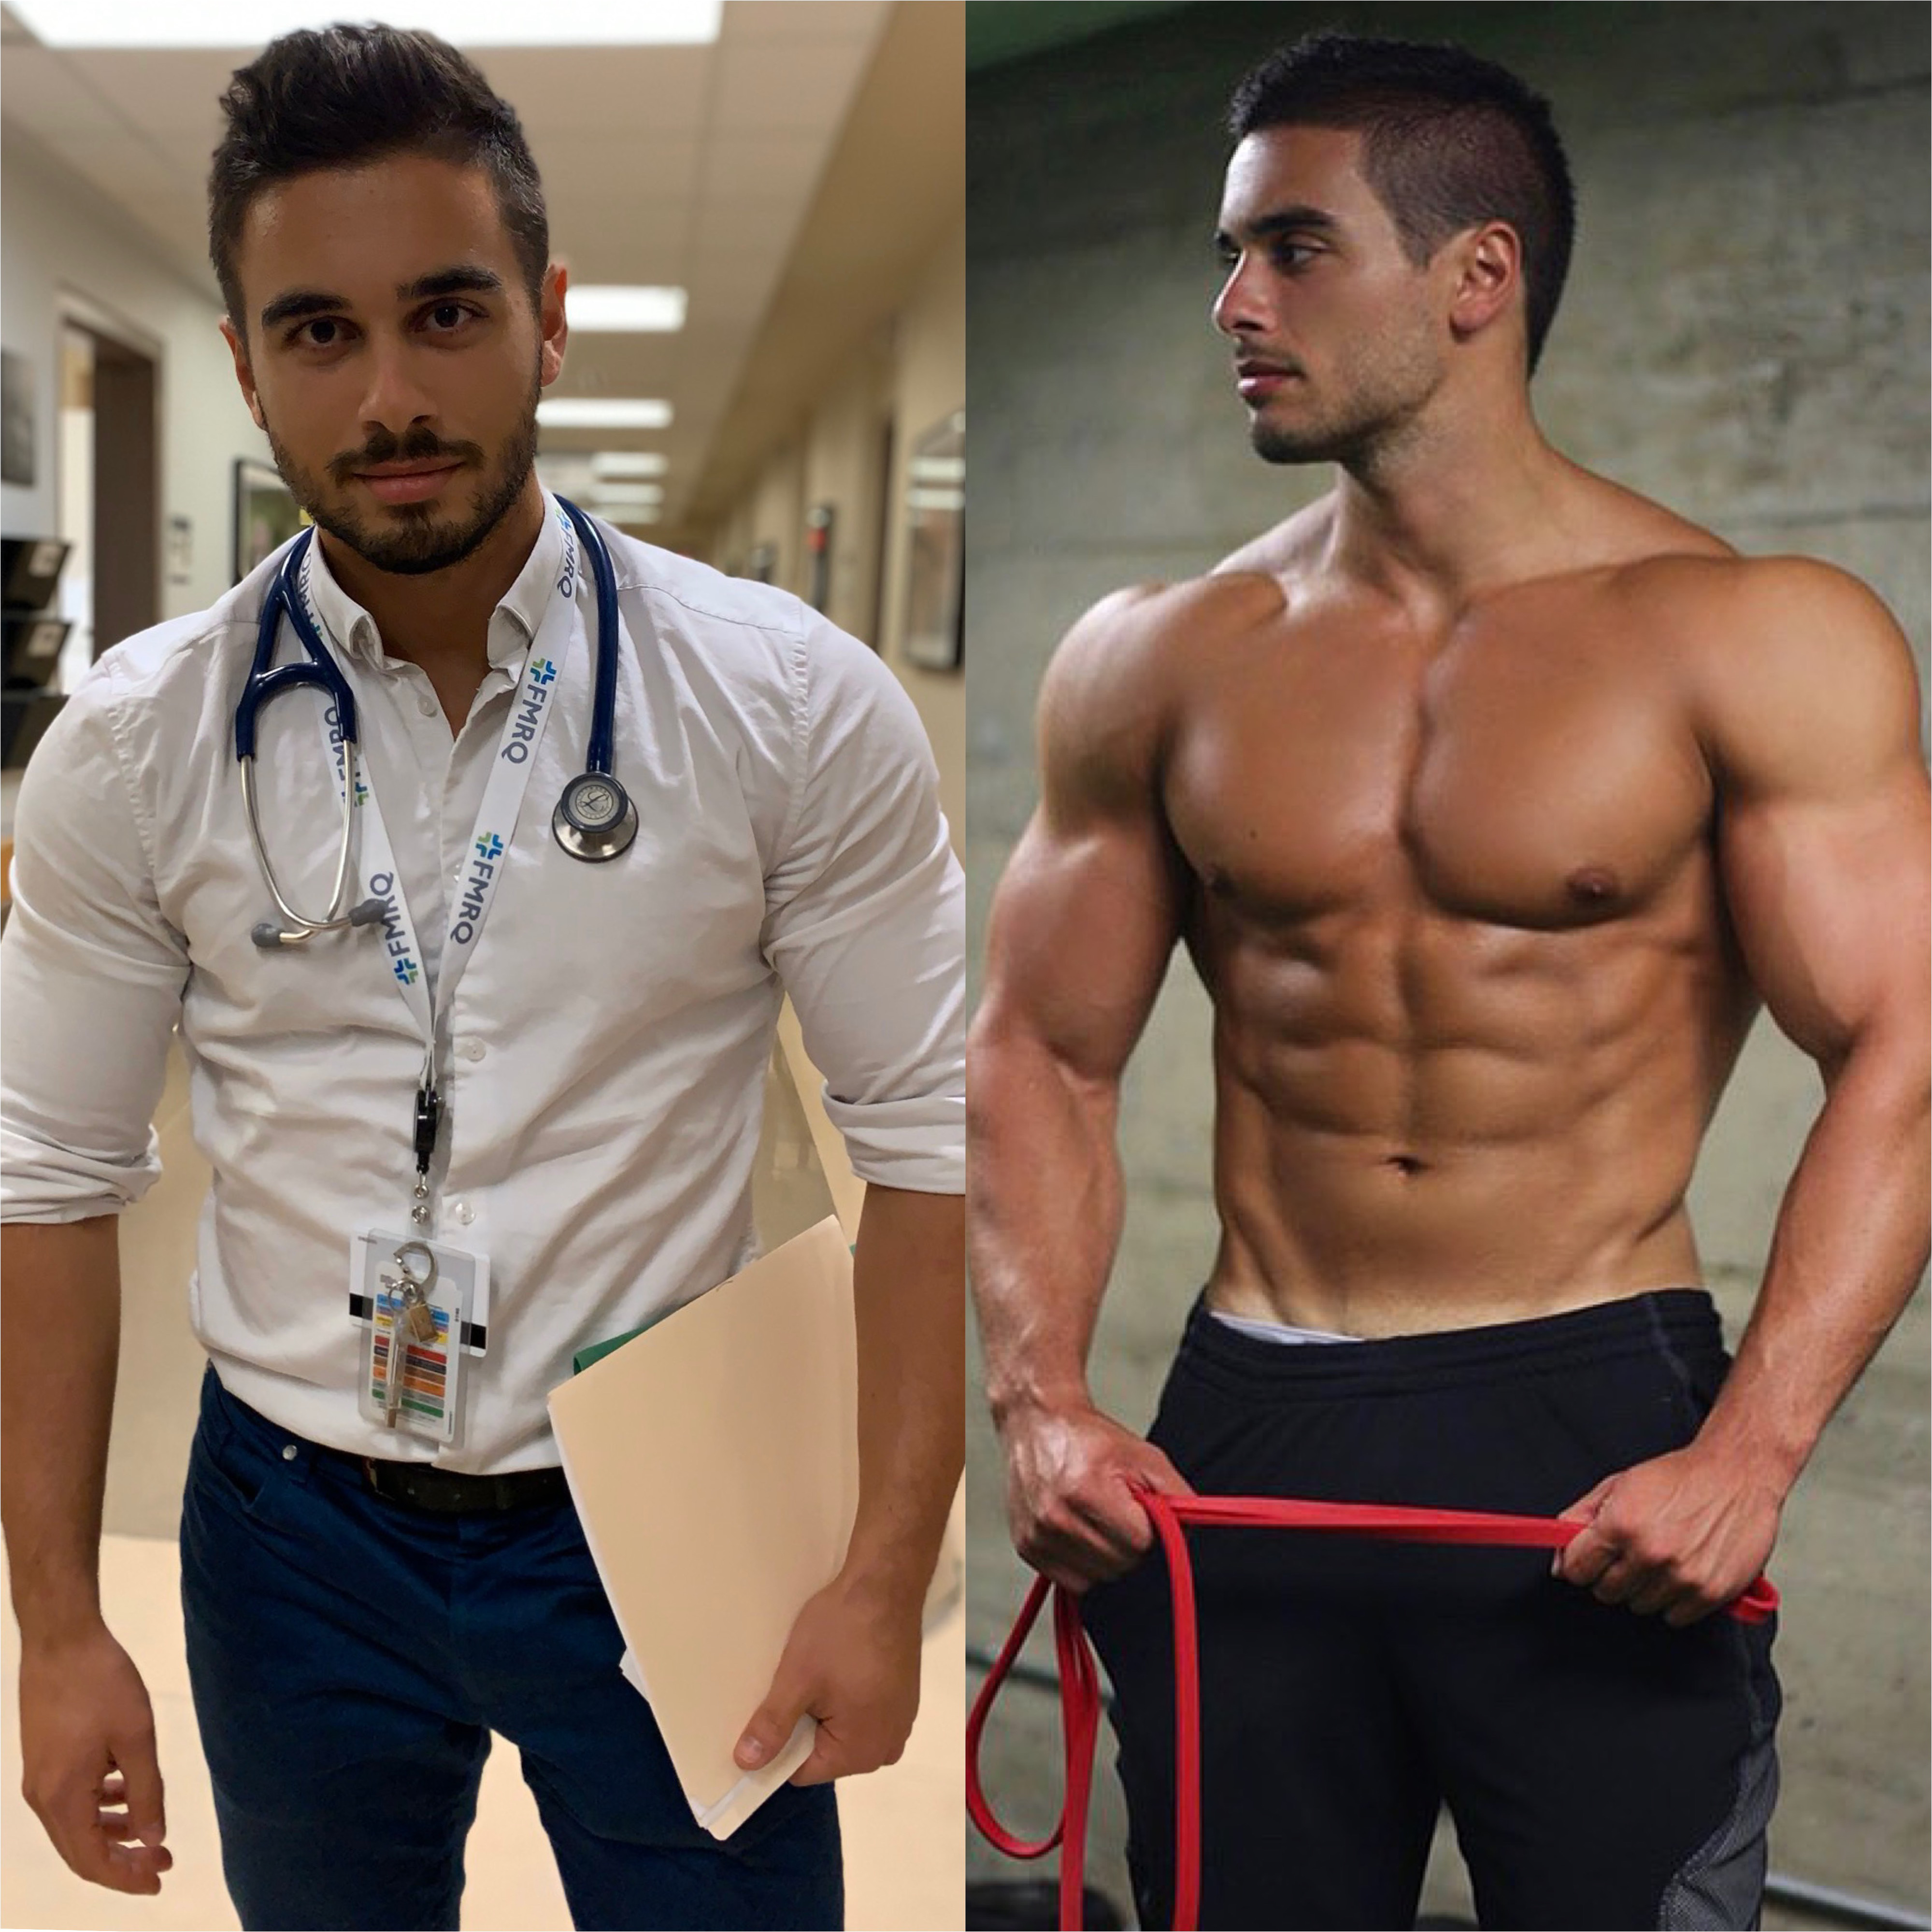 Marco Folino (@runandlift) - Medical Doctor and Fitness Coach transforming lives around the world